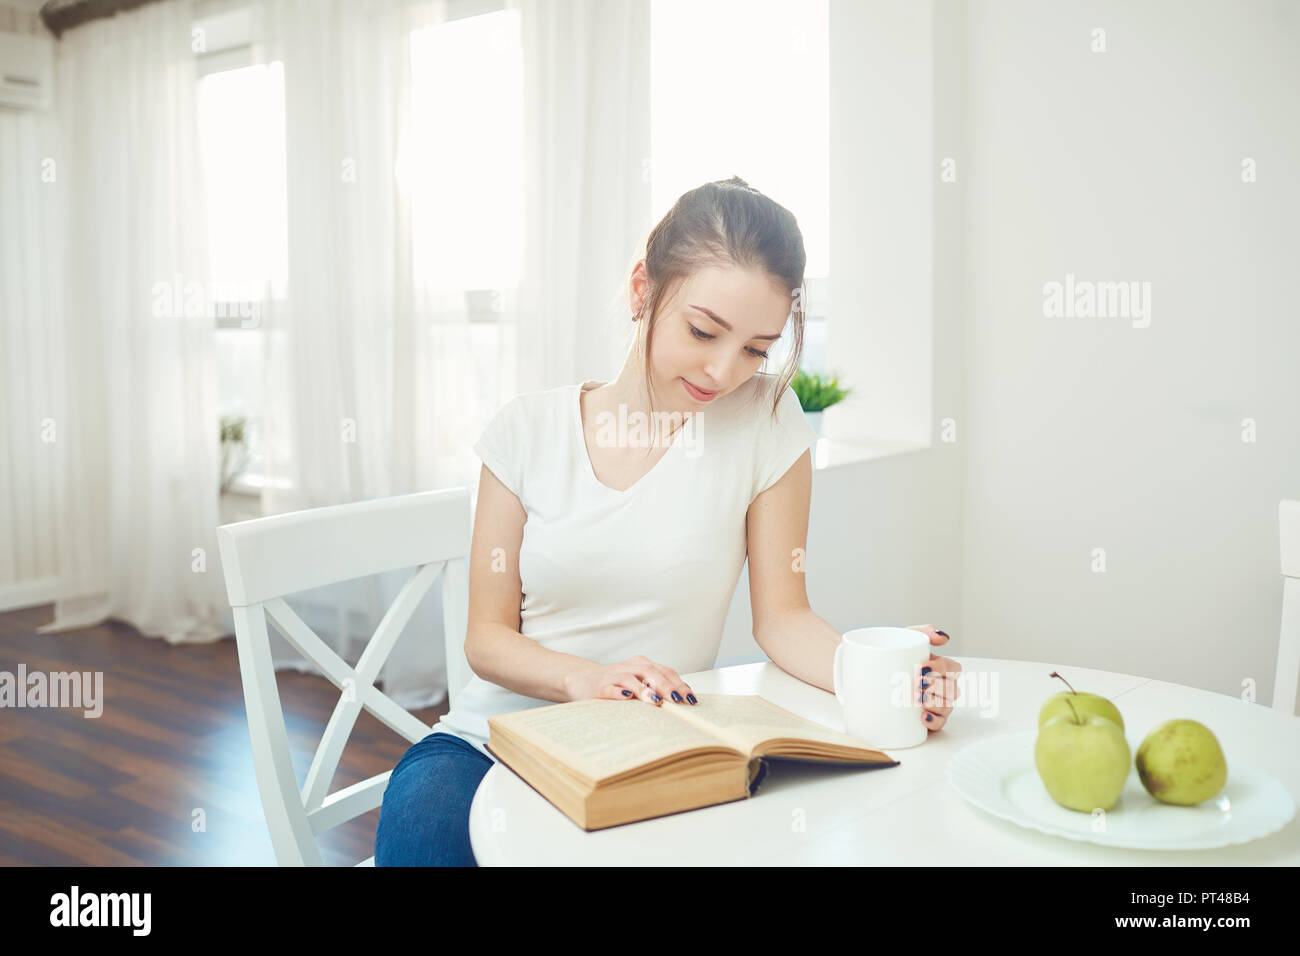 A young girl is reading a book sitting at a table. Stock Photo